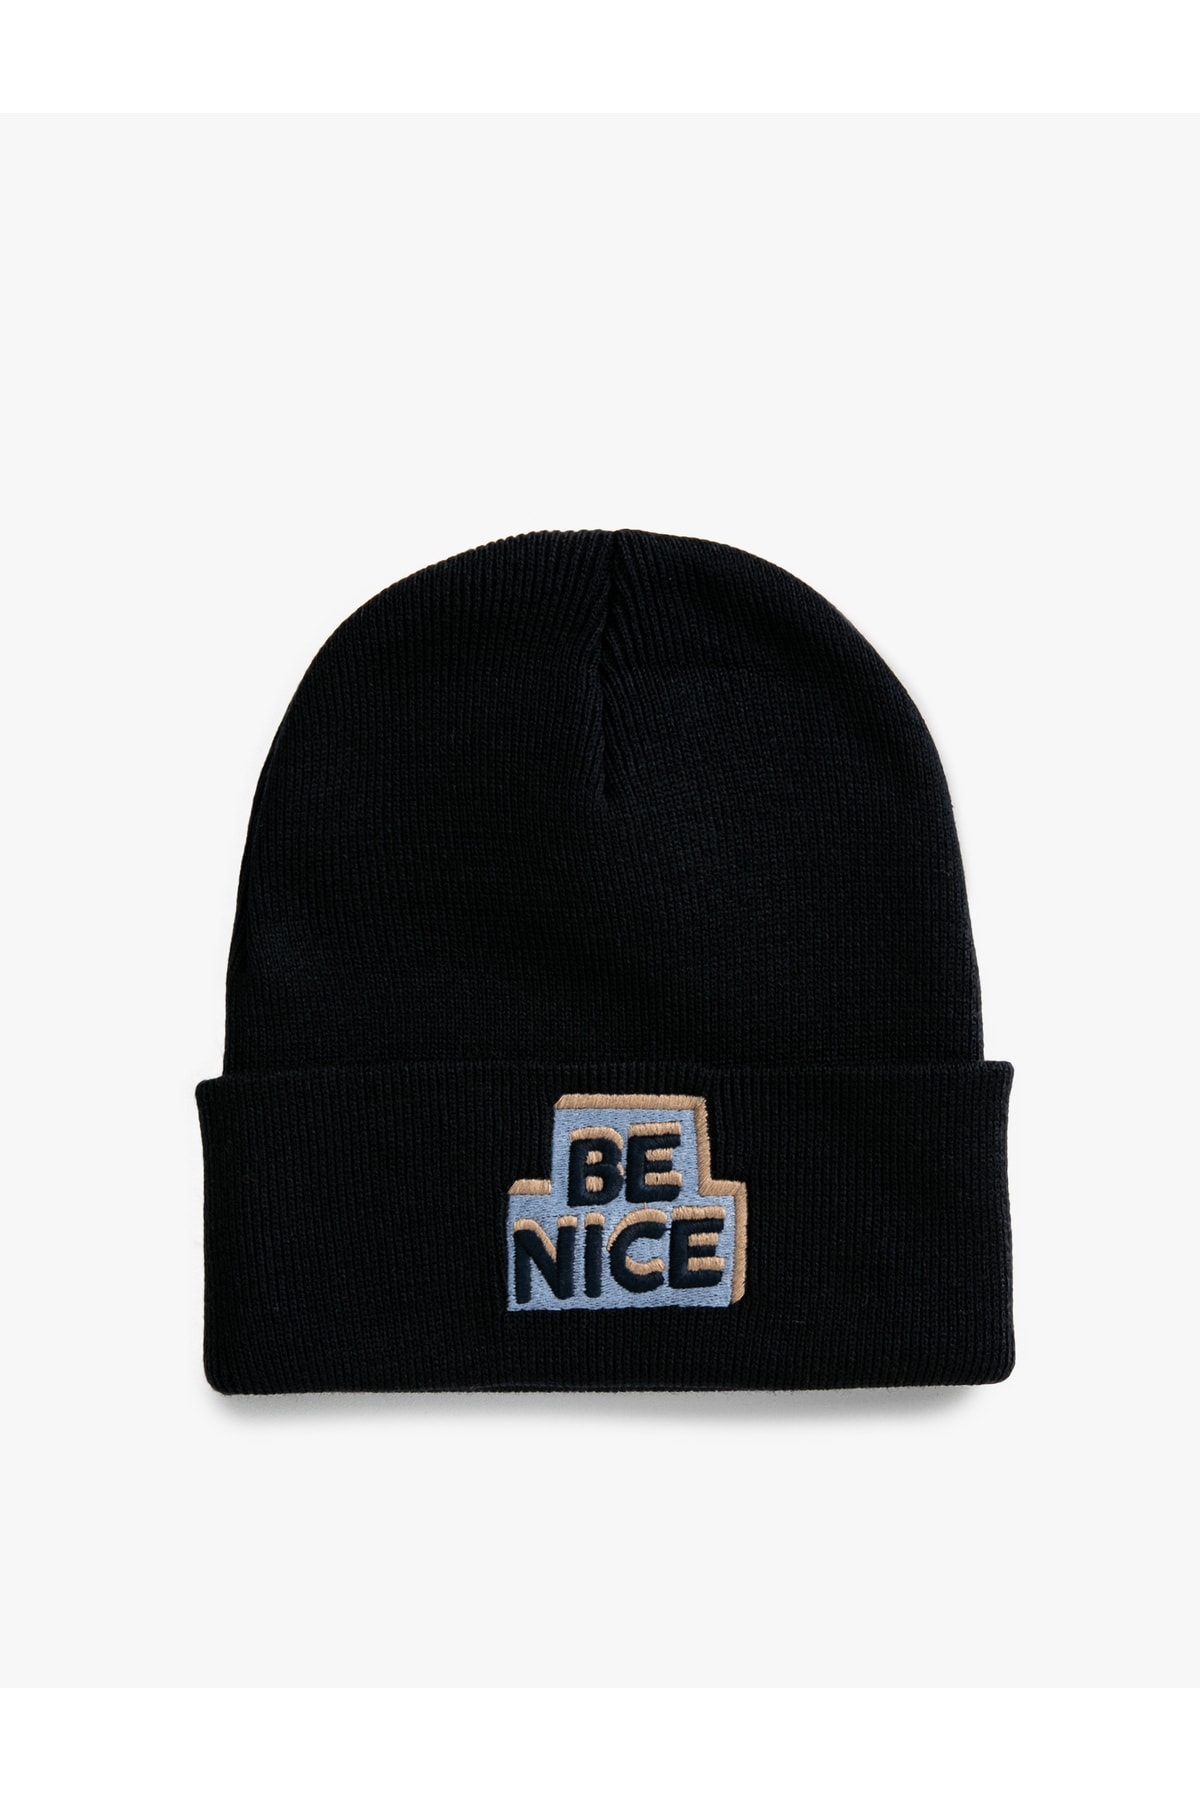 Koton Basic Knit Beanie Hat with Slogan Embroidered Fold Detail.